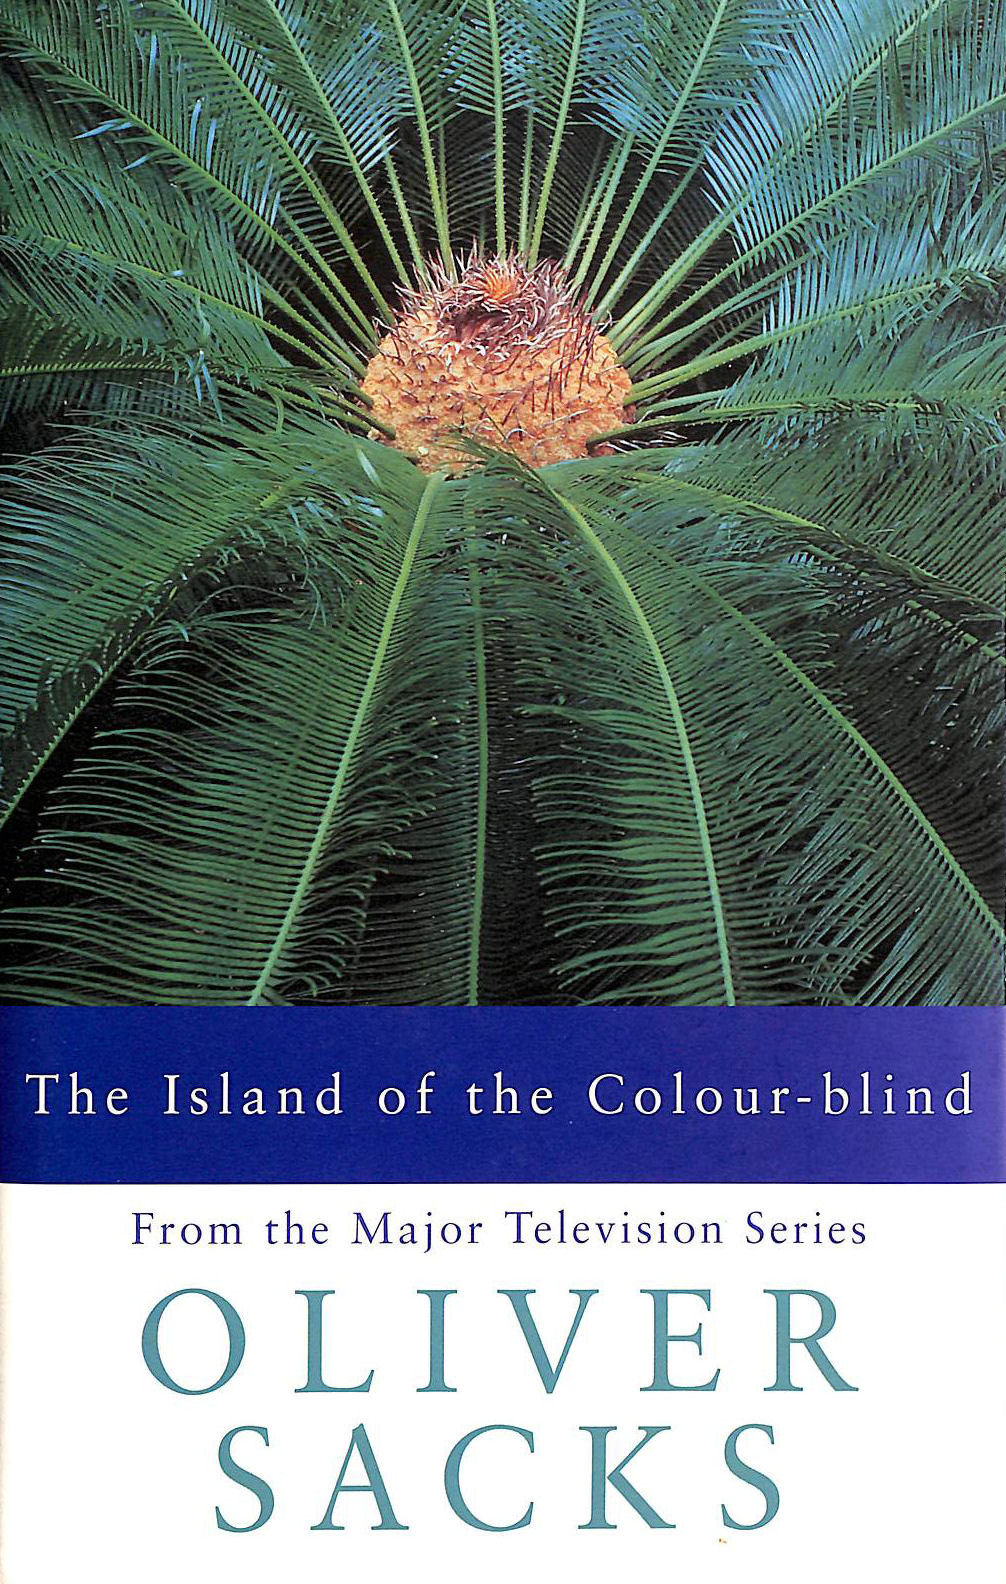 SACKS, OLIVER - The Island of the Colour-blind